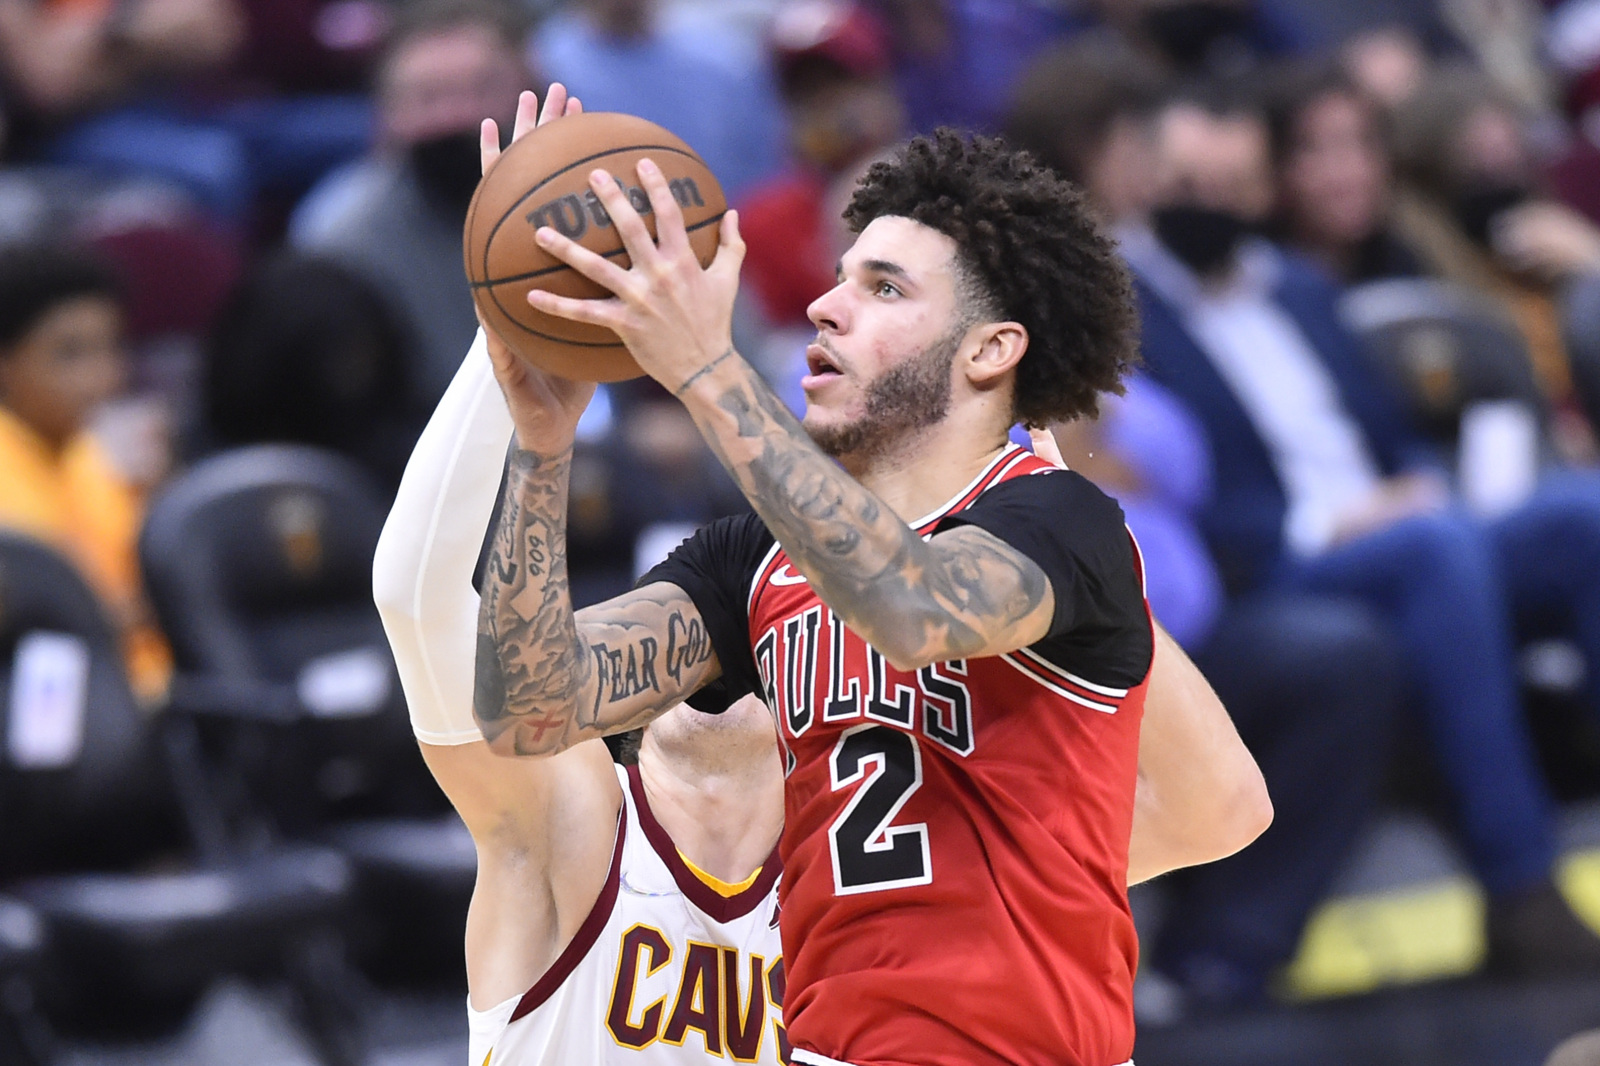 Chicago Bulls: Penalty set for Lonzo Ball tampering